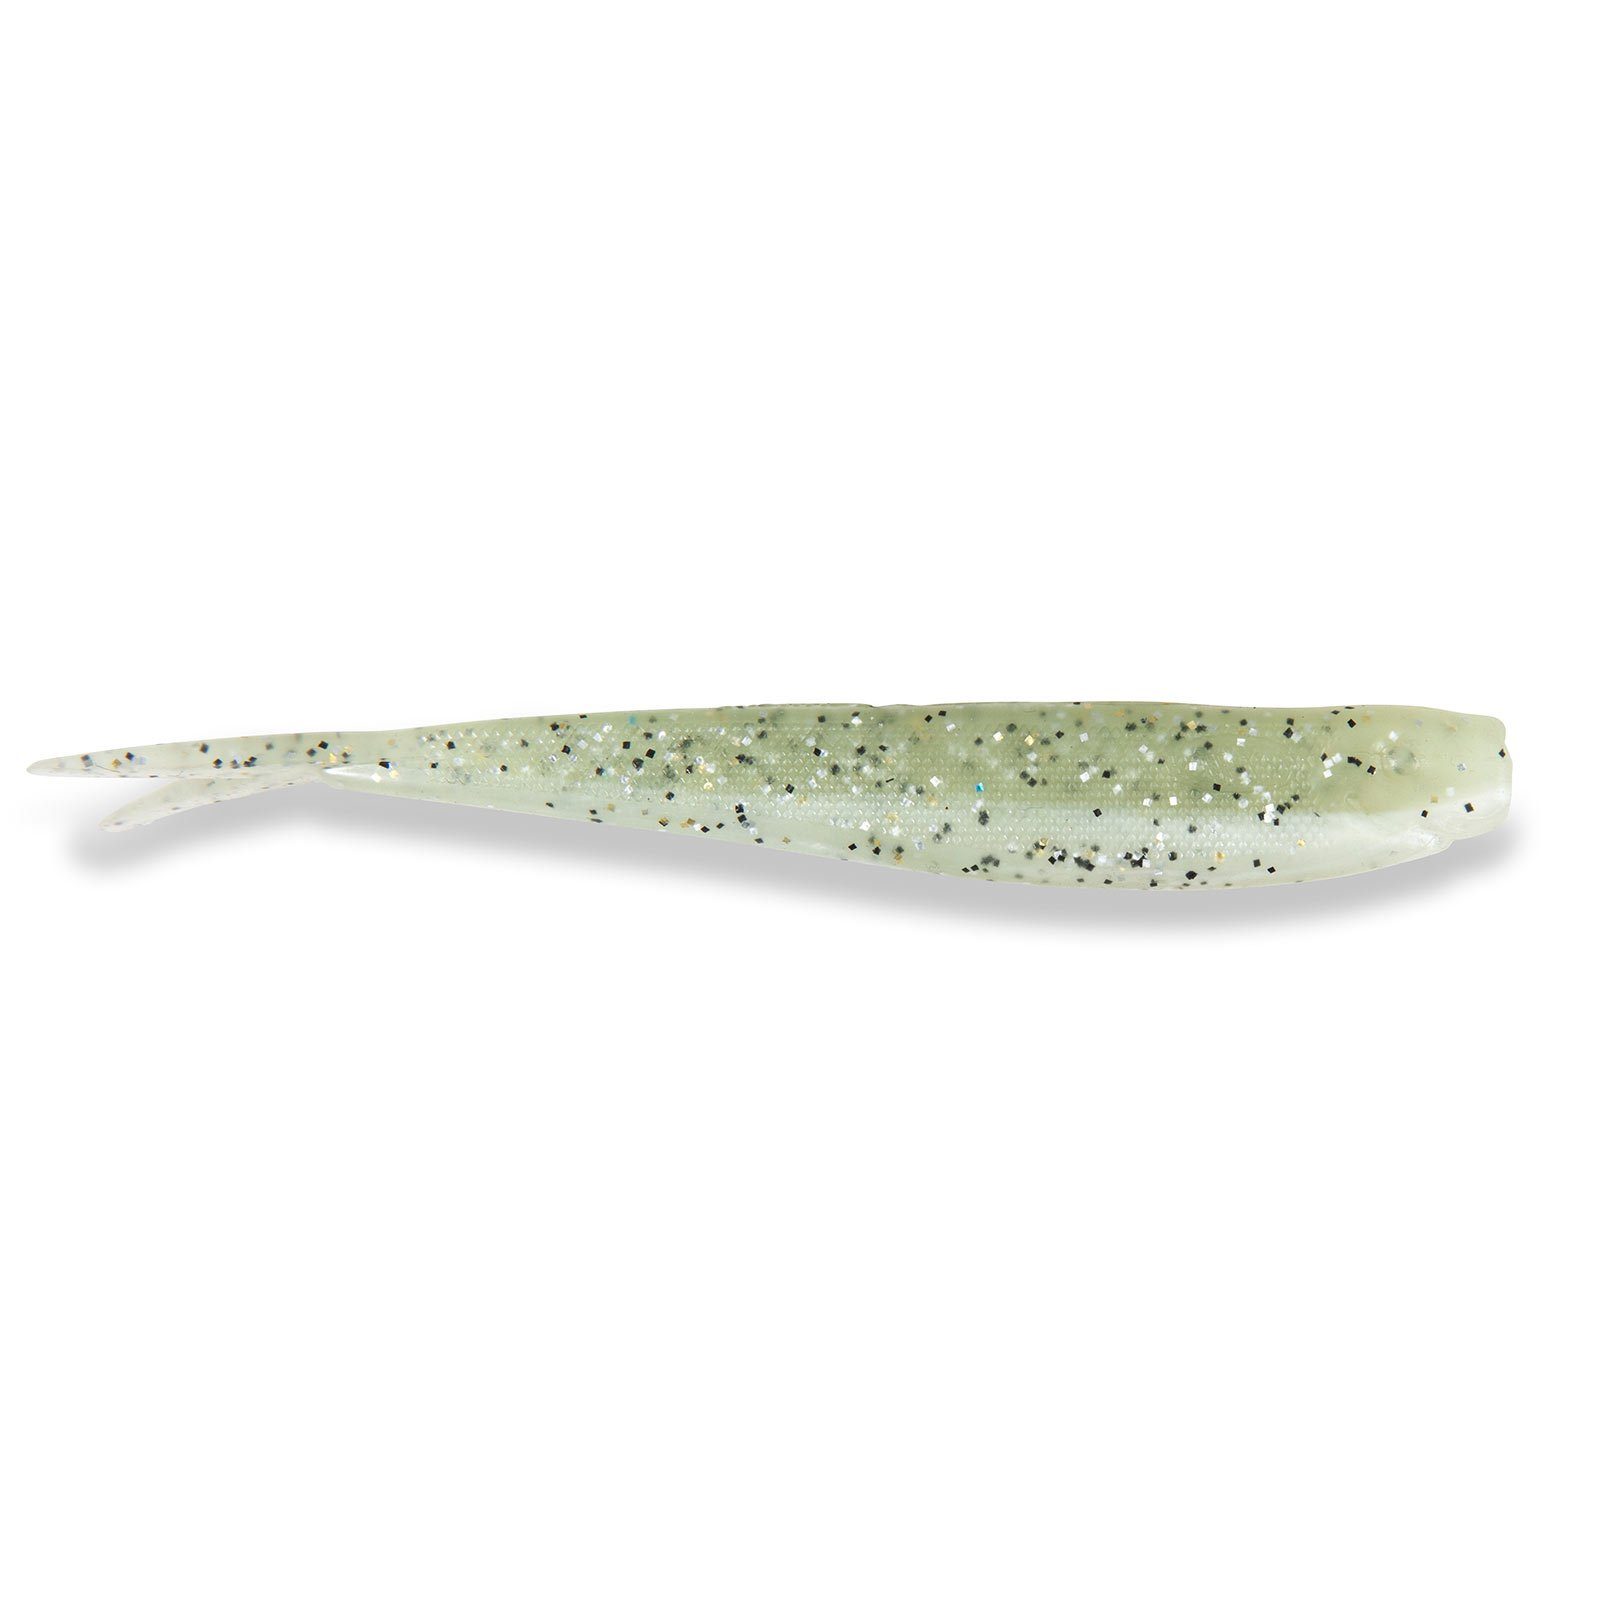 Moby Softbaits Kunstköder, Sänger Iron Claw Moby V-Tail Non Toxic